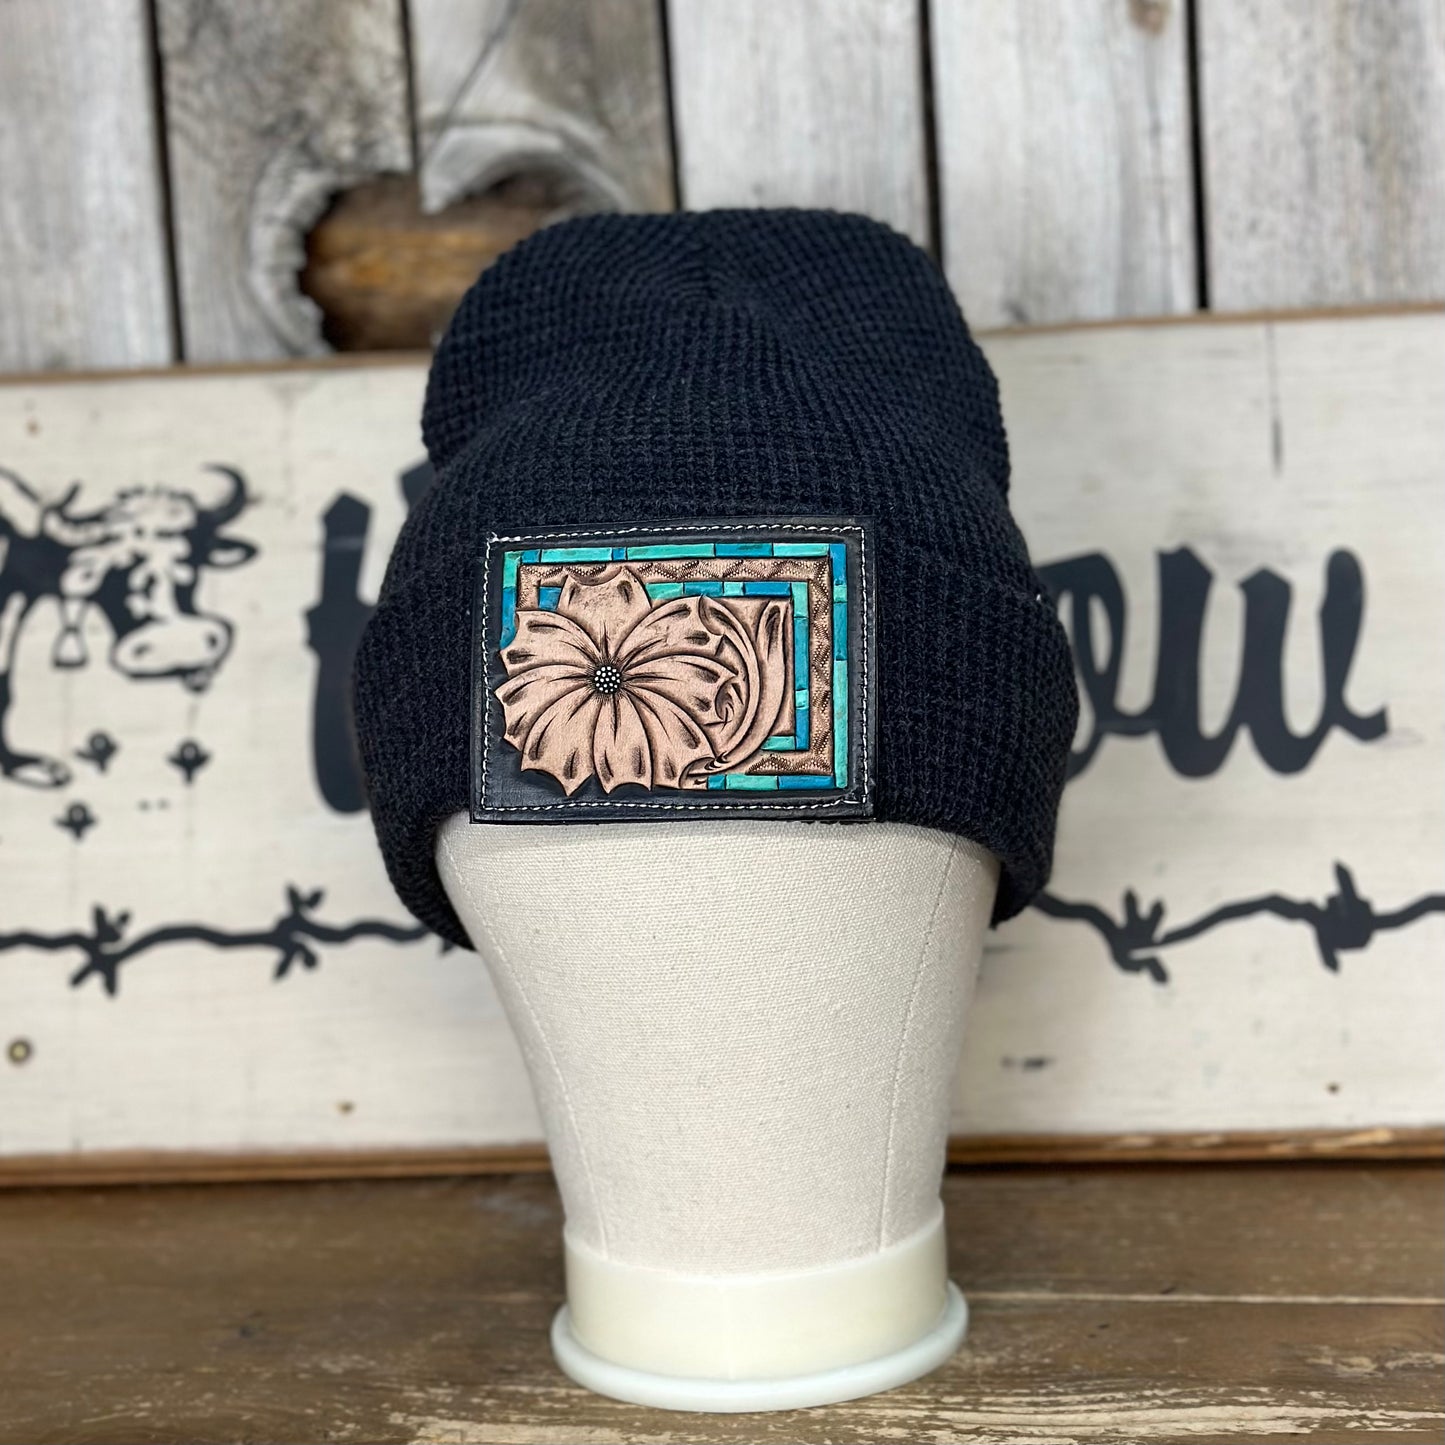 Amanda Rose Knit Cuff Beanie w/ Hand Tooled Leather Patch